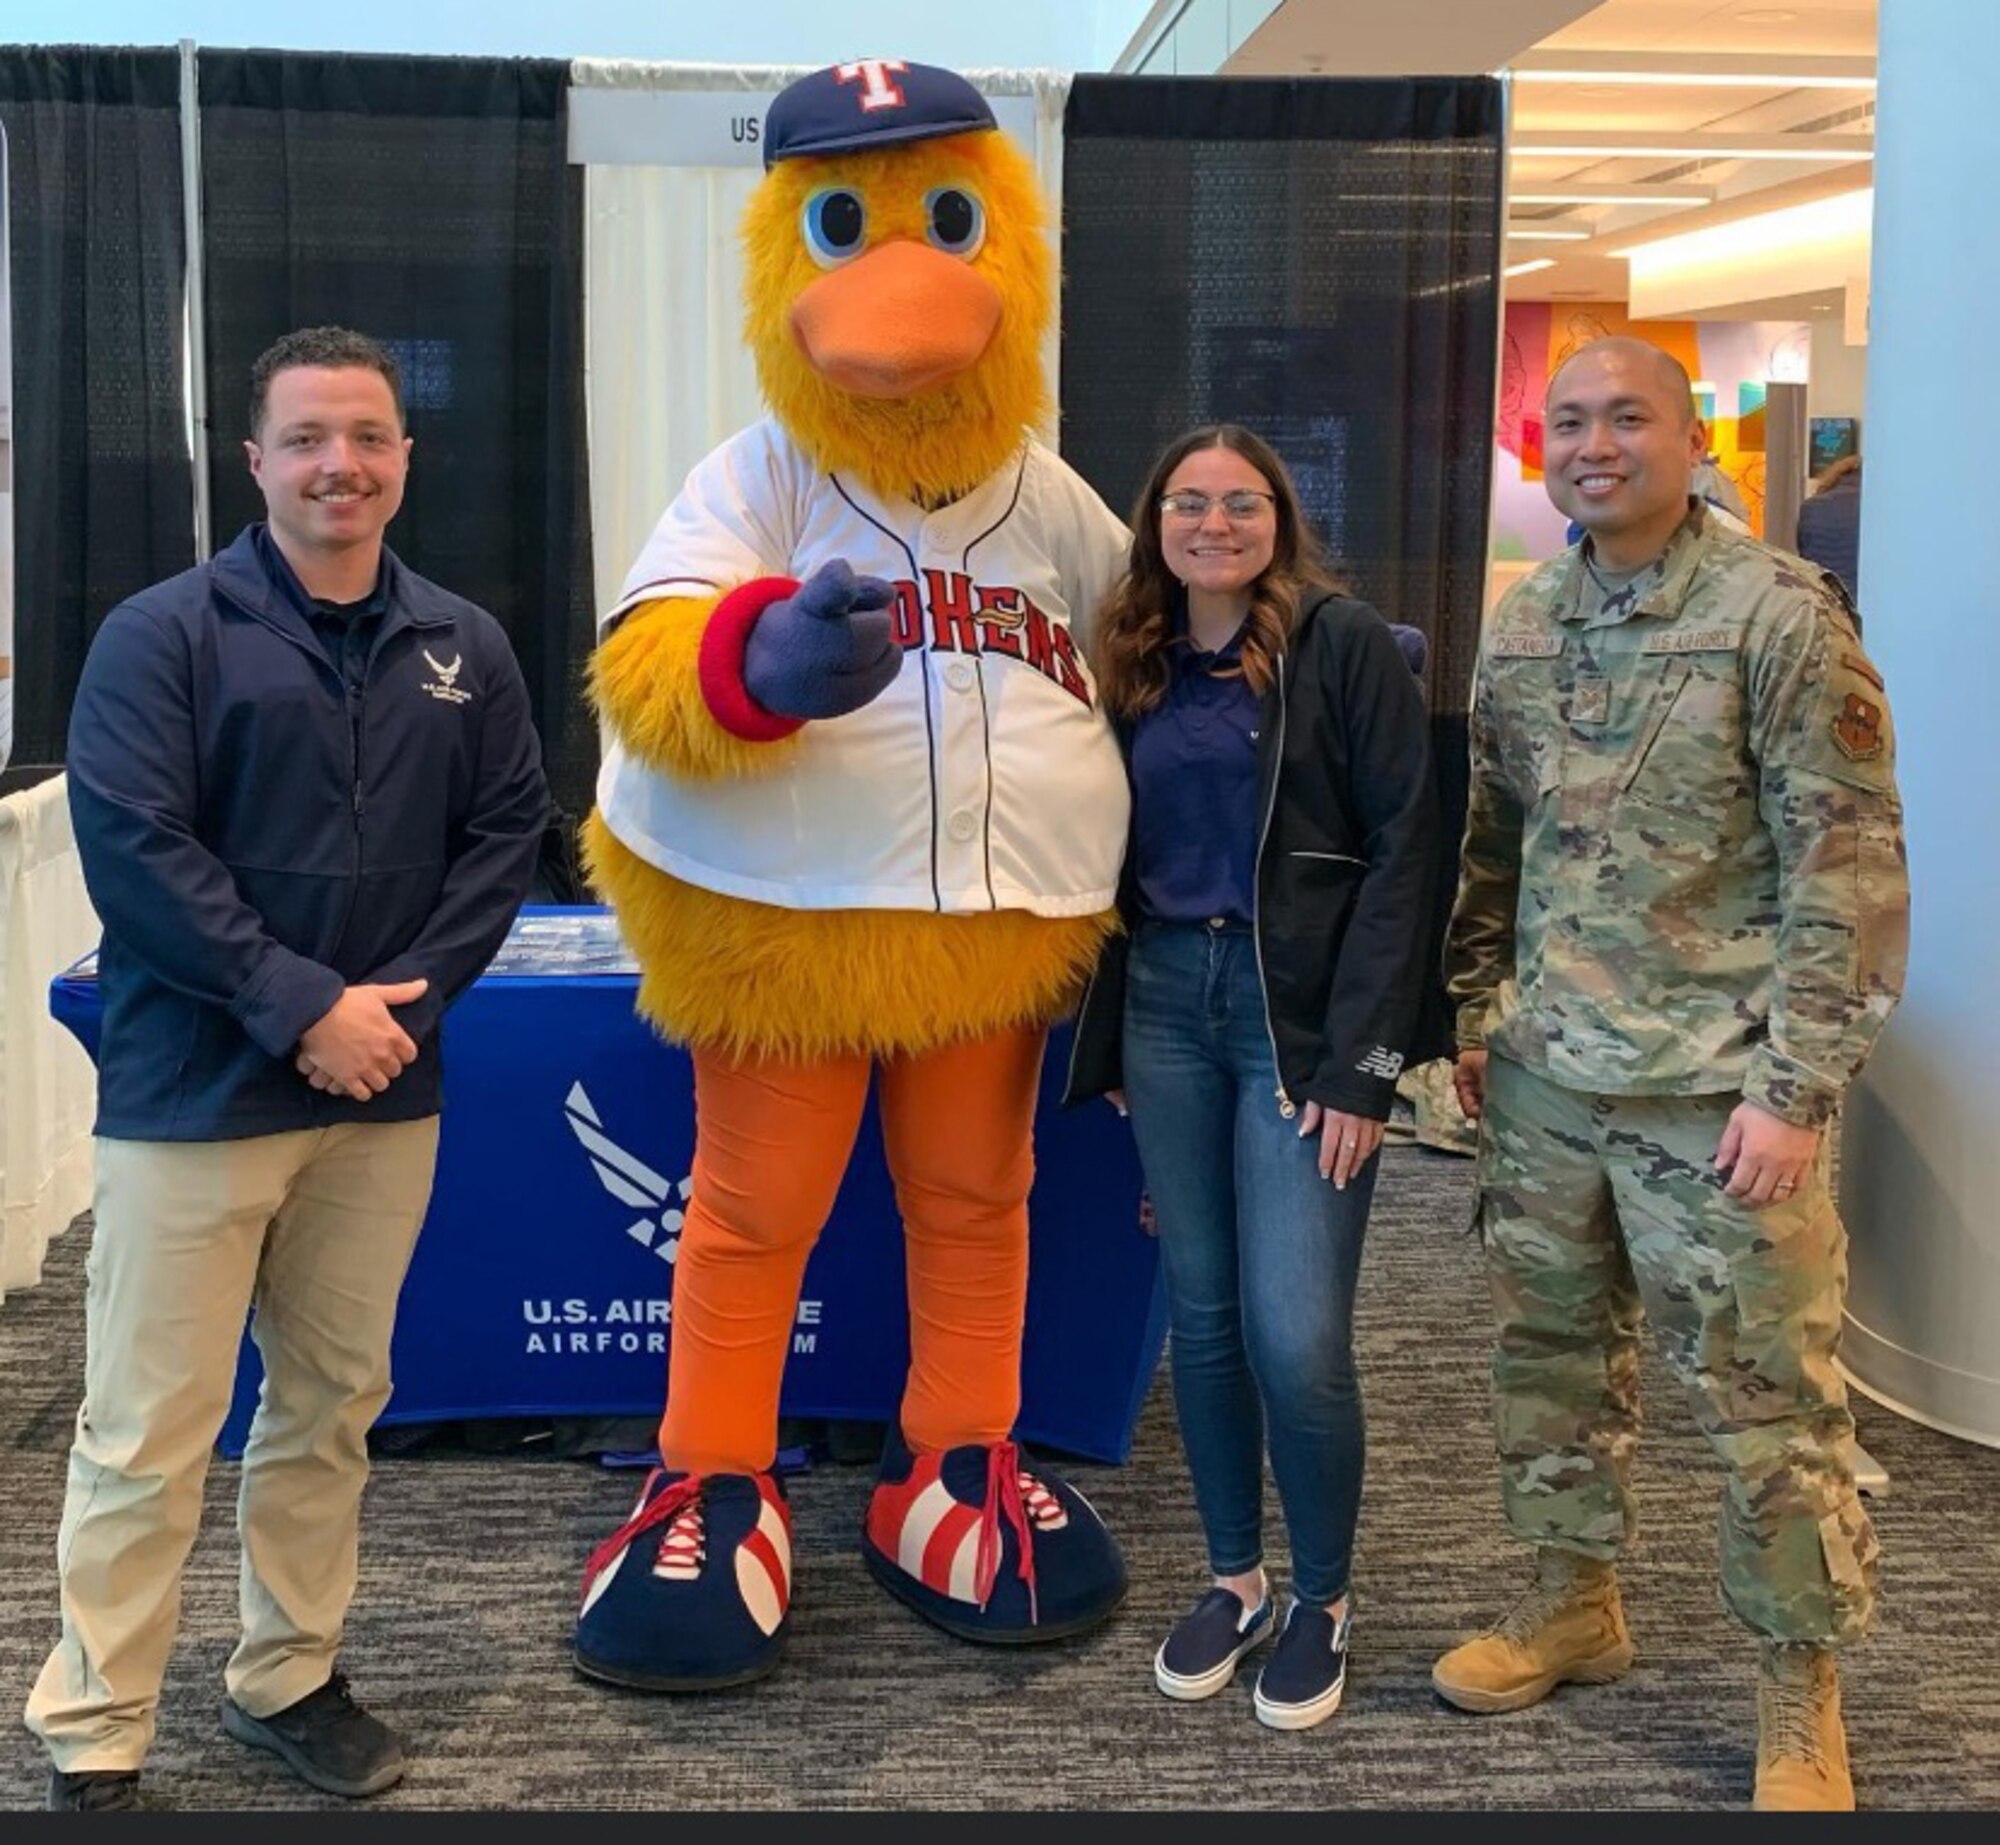 The Toledo Recruiters (MSgt Mcgeehan, TSgt Coleman, TSgt Zilch, and SSgt Harrison), the squadron marketing team (TSgt Castaneda, MSgt Lobidoluzano) and RAPPER (AB Abbigayle Pfaff) were able to participate in the Toledo Auto Show at the Seagate Center in downtown Toledo.